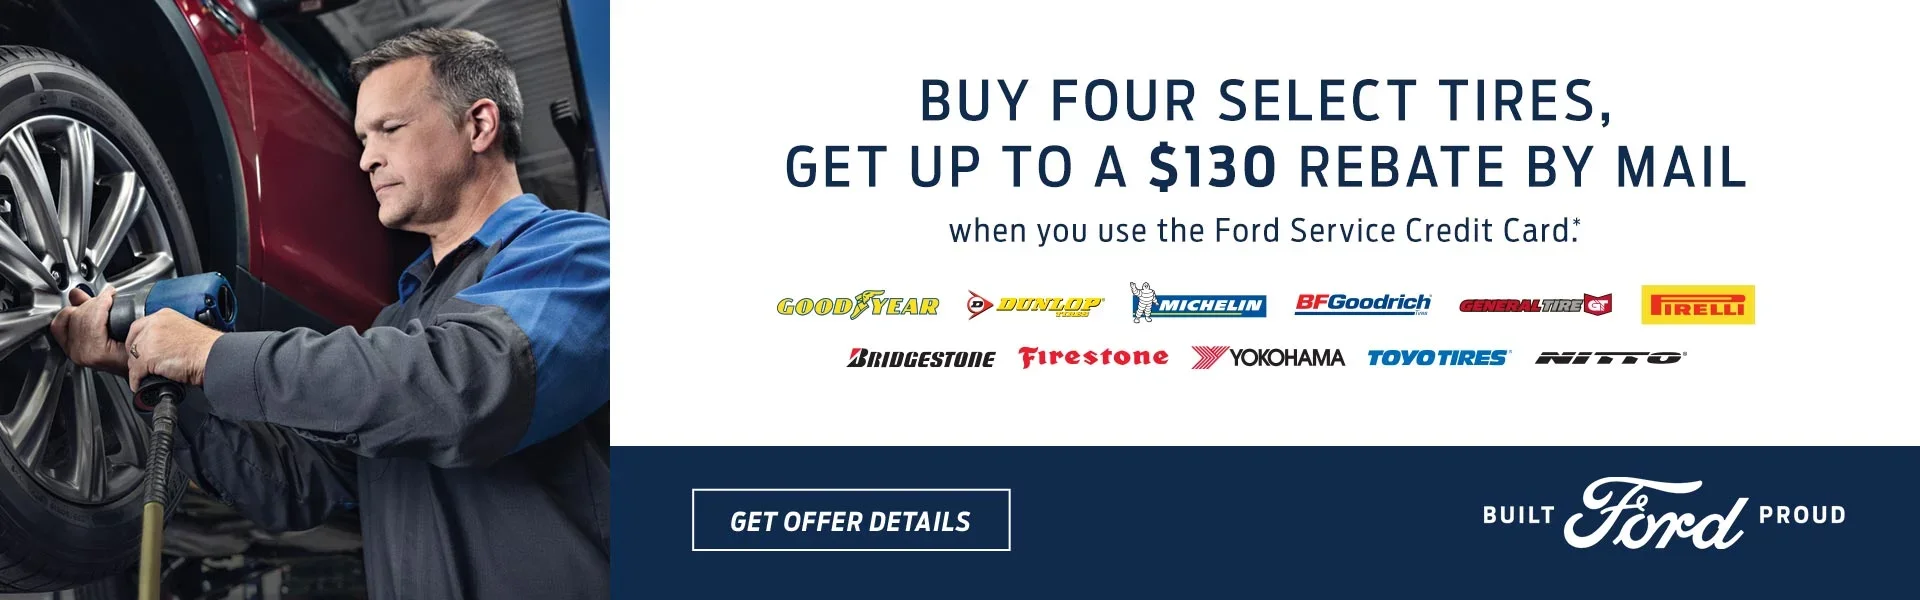 Buy Four Select Tires